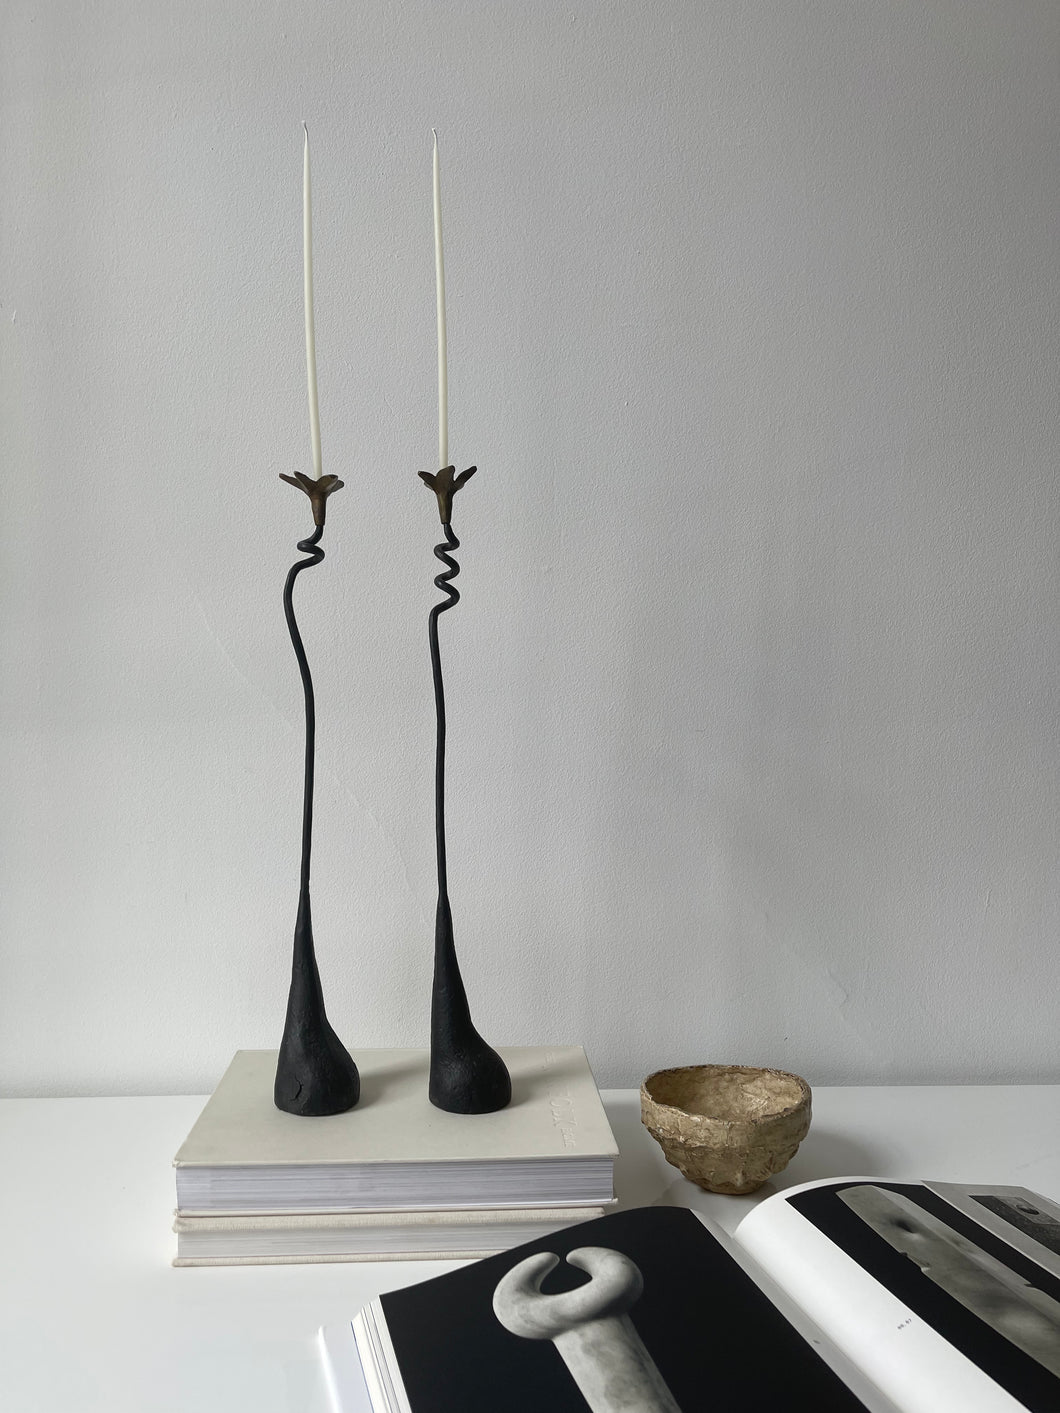 Tall Sculptural Wrought Iron Candle Holders